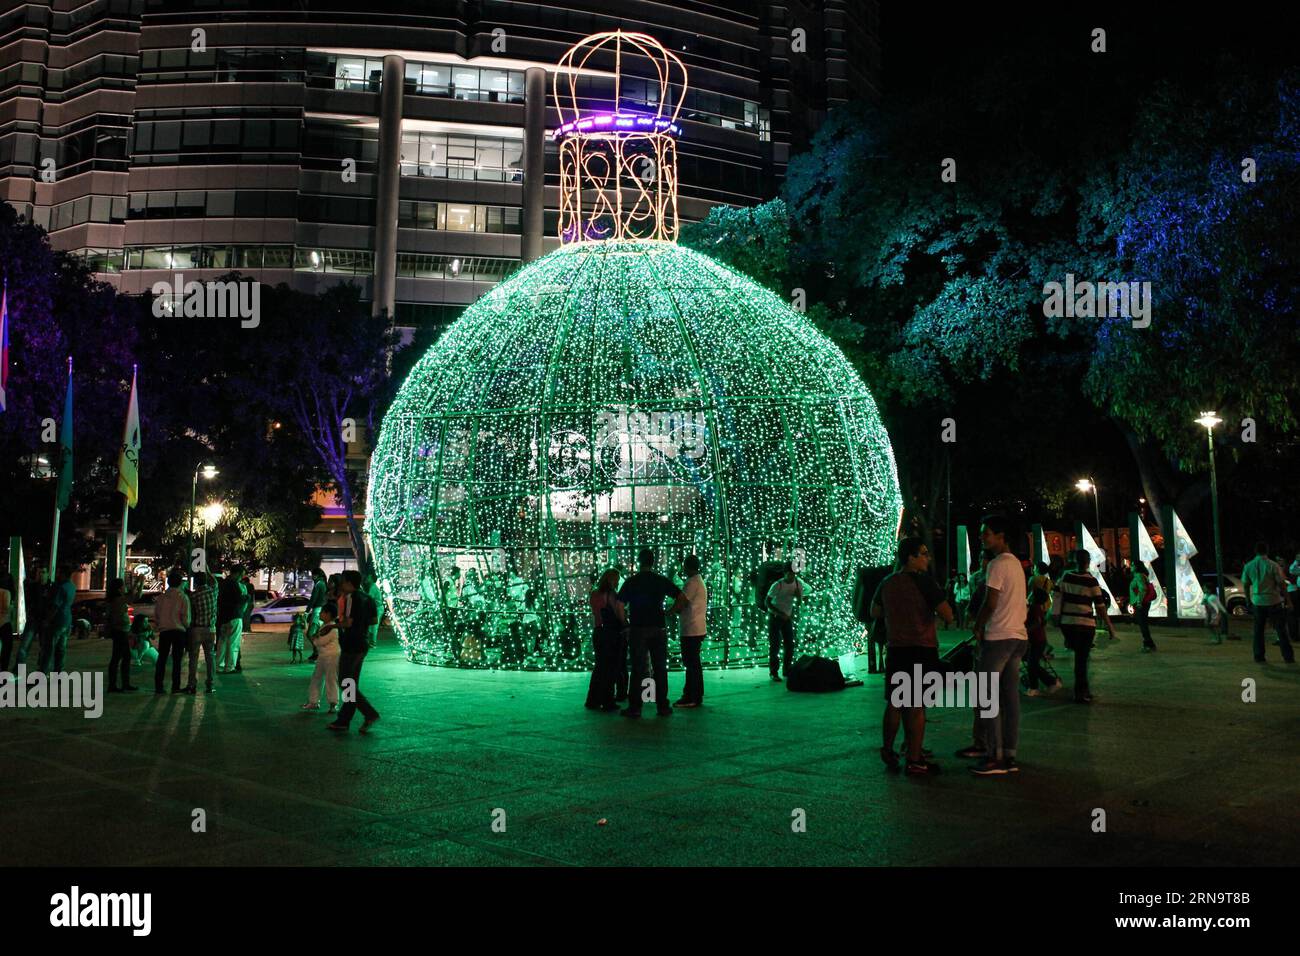 CARACAS -- Image taken on Dec. 16, 2015 shows people watching illuminated Christmas decorations at La Castellana Square, in Caracas, Venezuela. In Latin America, a region where Catholicism predominates, Christmas in one of the main celebrations. Boris Vergara) VENEZUELA-CARACAS-SOCIETY-CHRISTMAS-FEATURE e BorisxVergara PUBLICATIONxNOTxINxCHN   Caracas Image Taken ON DEC 16 2015 Shows Celebrities Watching illuminated Christmas decorations AT La Castellana Square in Caracas Venezuela in Latin America a Region Where Catholicism  Christmas in One of The Main celebrations Boris Vergara Venezuela Ca Stock Photo